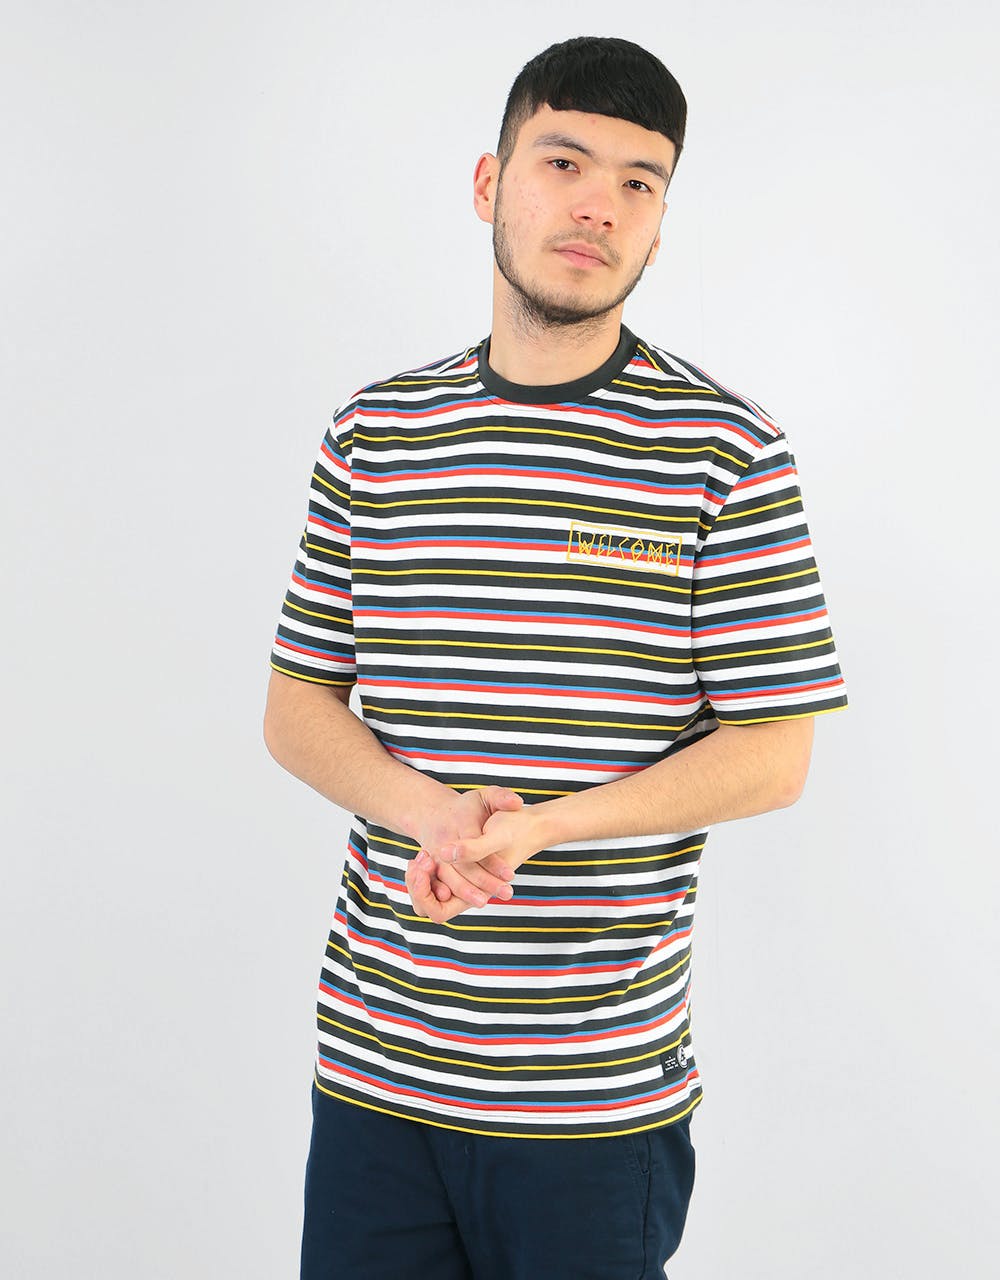 Welcome Surf Stripe S/S Knit T-Shirt - Black/White/Primary